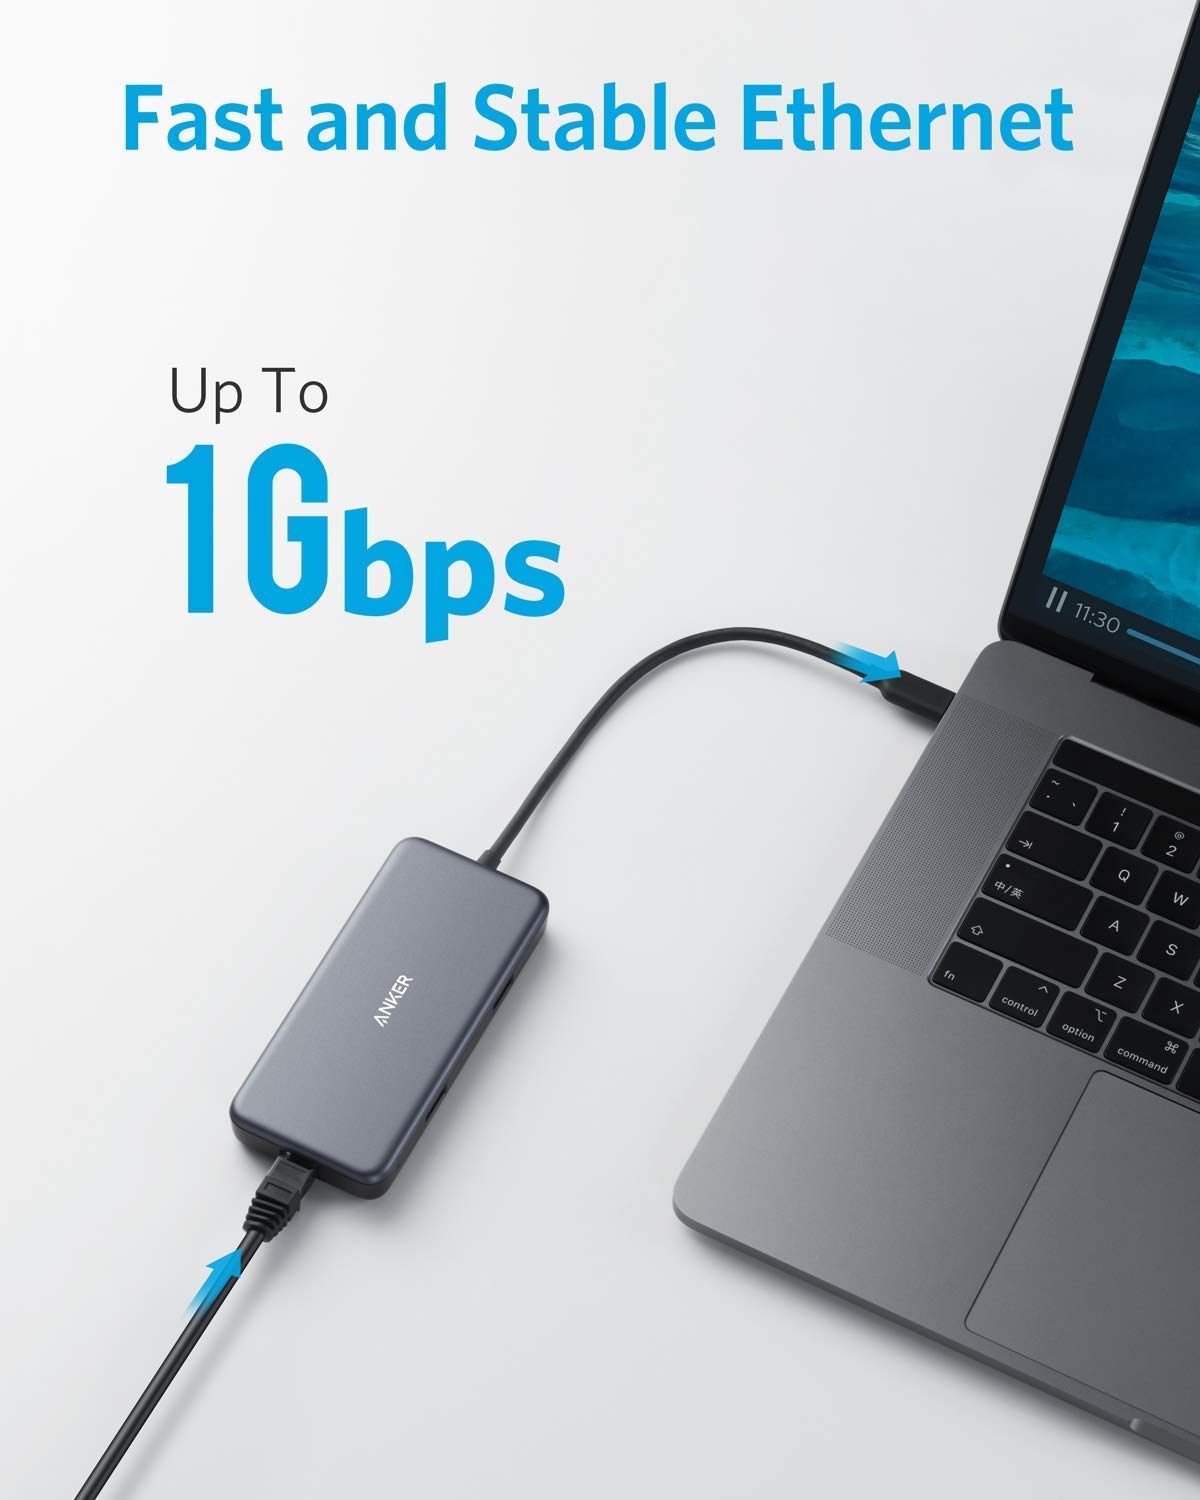 Anker USB C Hub Adapter, PowerExpand+ 7-in-1 USB C Hub, with 4K USB C to HDMI, 60W Power Delivery, 1Gbps Ethernet, 2 USB 3.0 Ports, SD and microSD Card Readers, for MacBook Pro and Other USB C Laptops